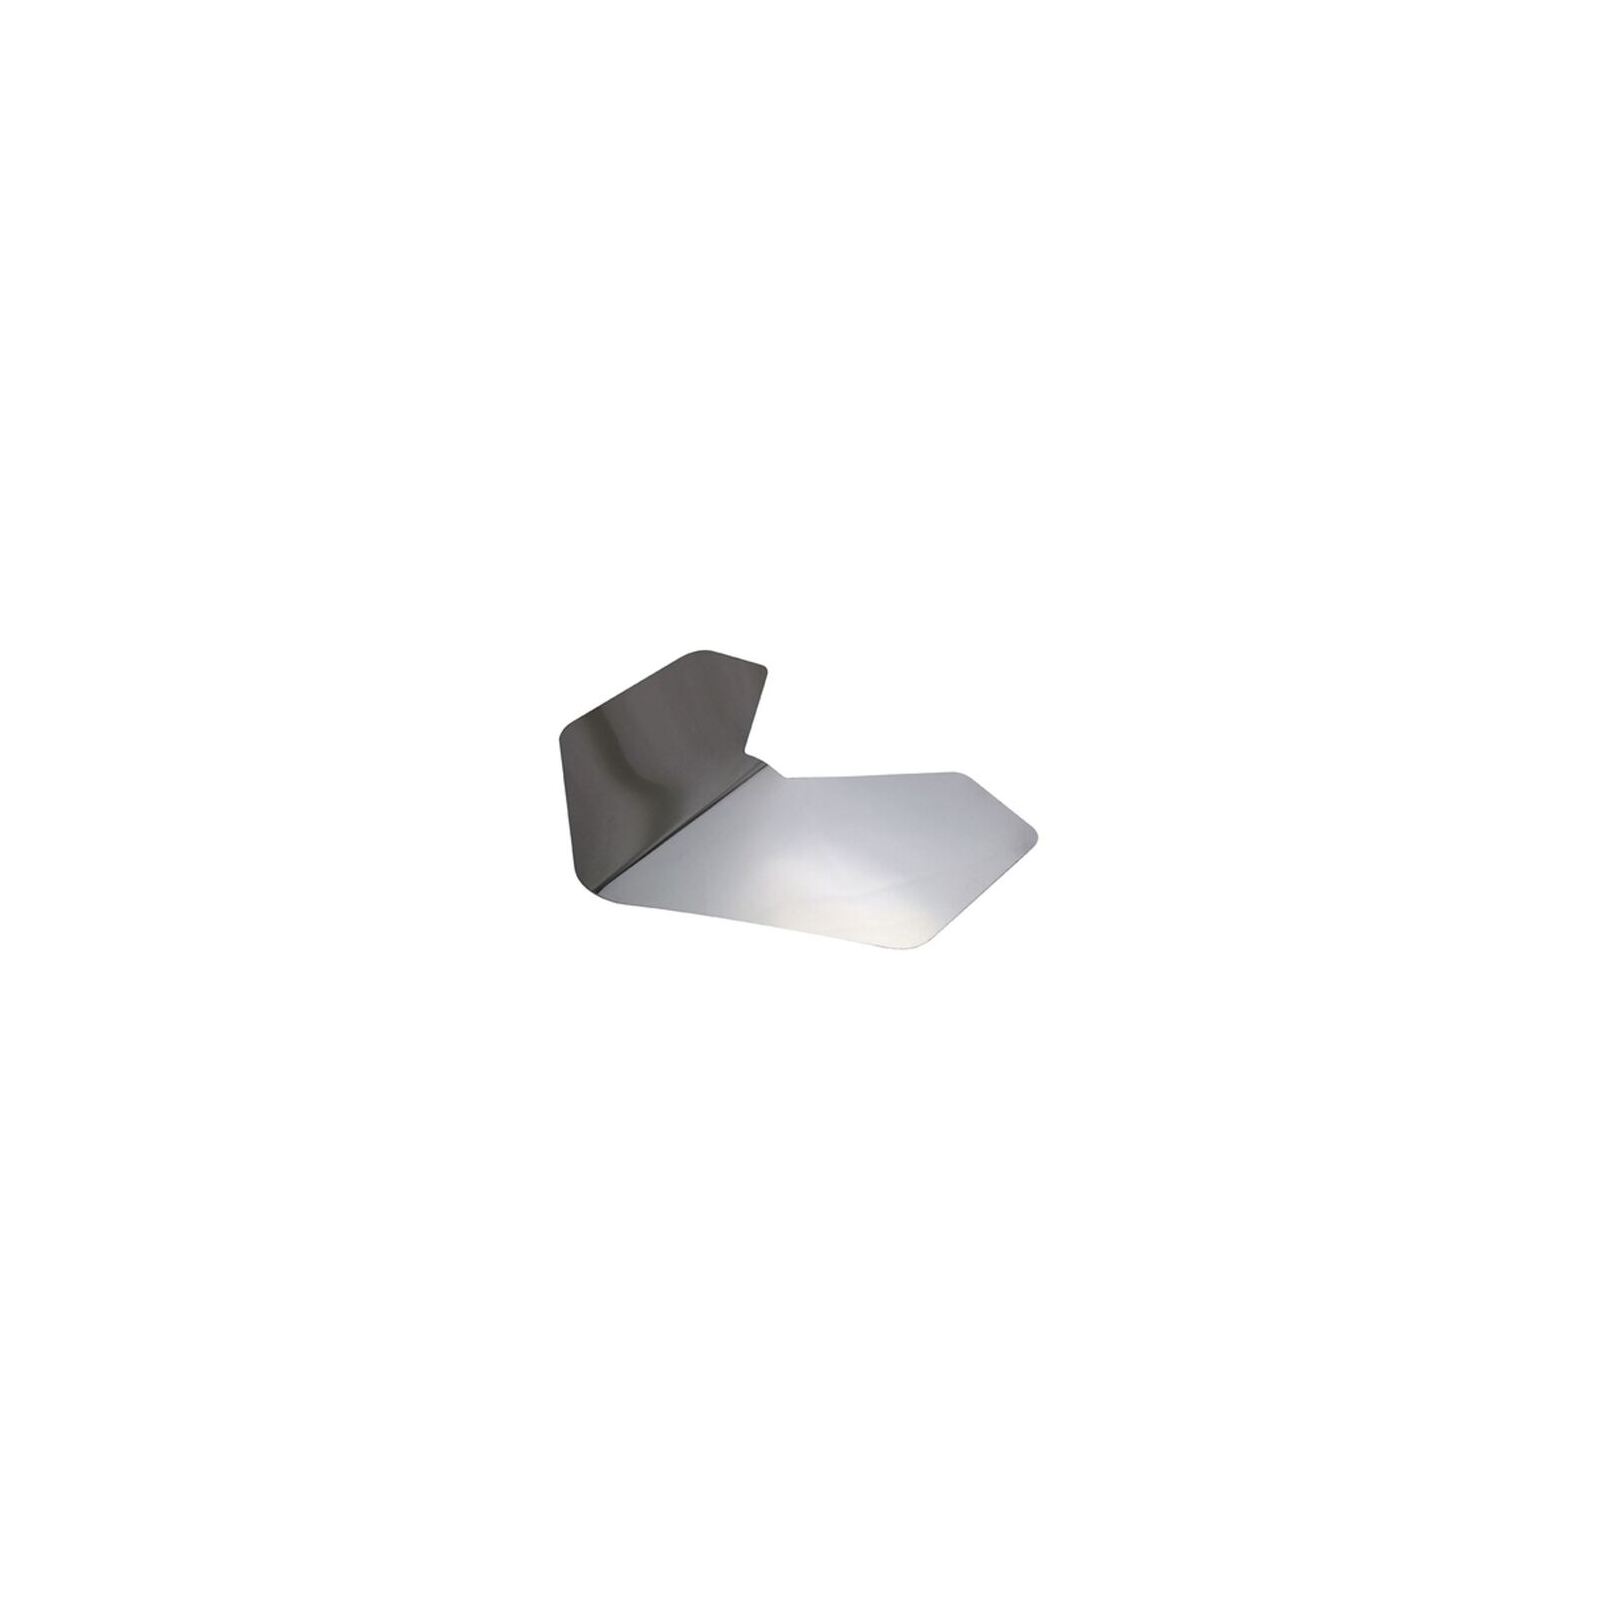 Bow Shield Protector 316 Stainless Steel - Small 165x152mm